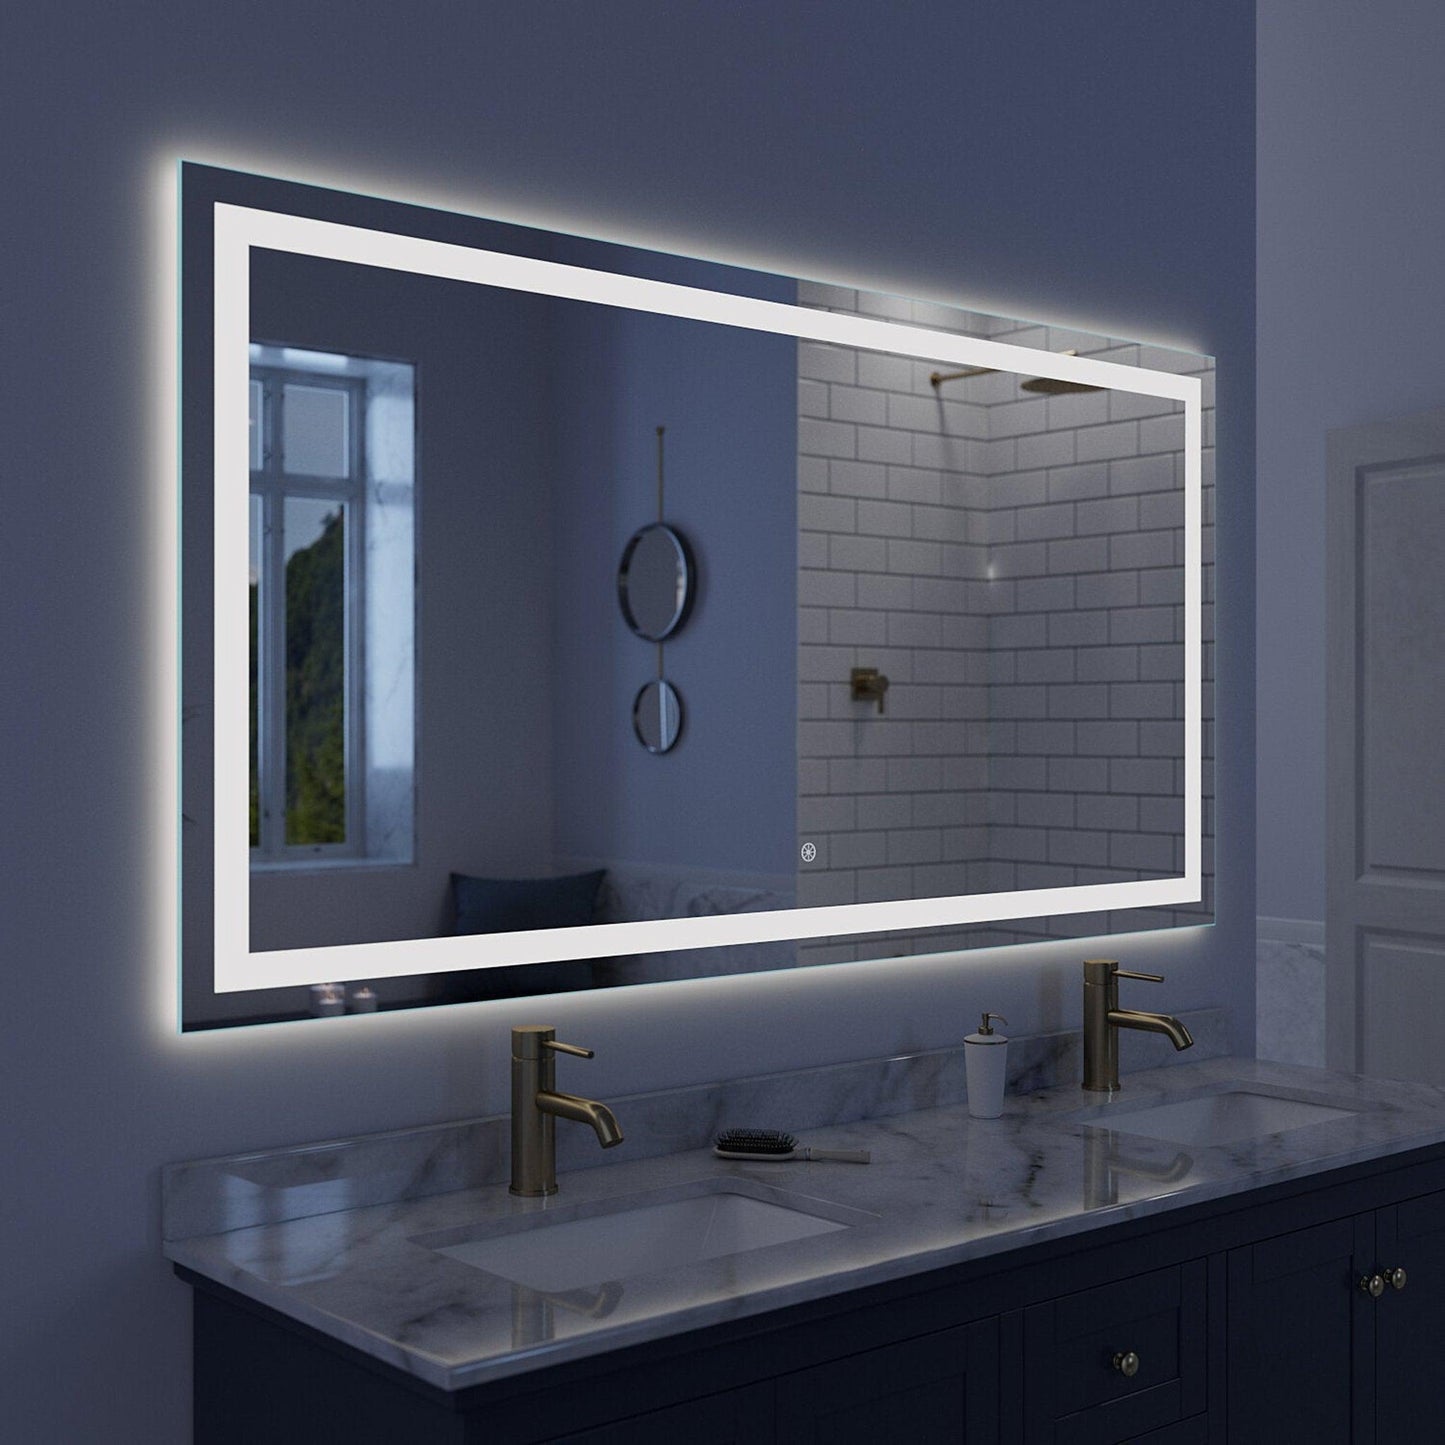 Luxaar Lumina 70" x 36" LED Lighted Vanity Mirror With Built-in Dimmer & Anti-Fog